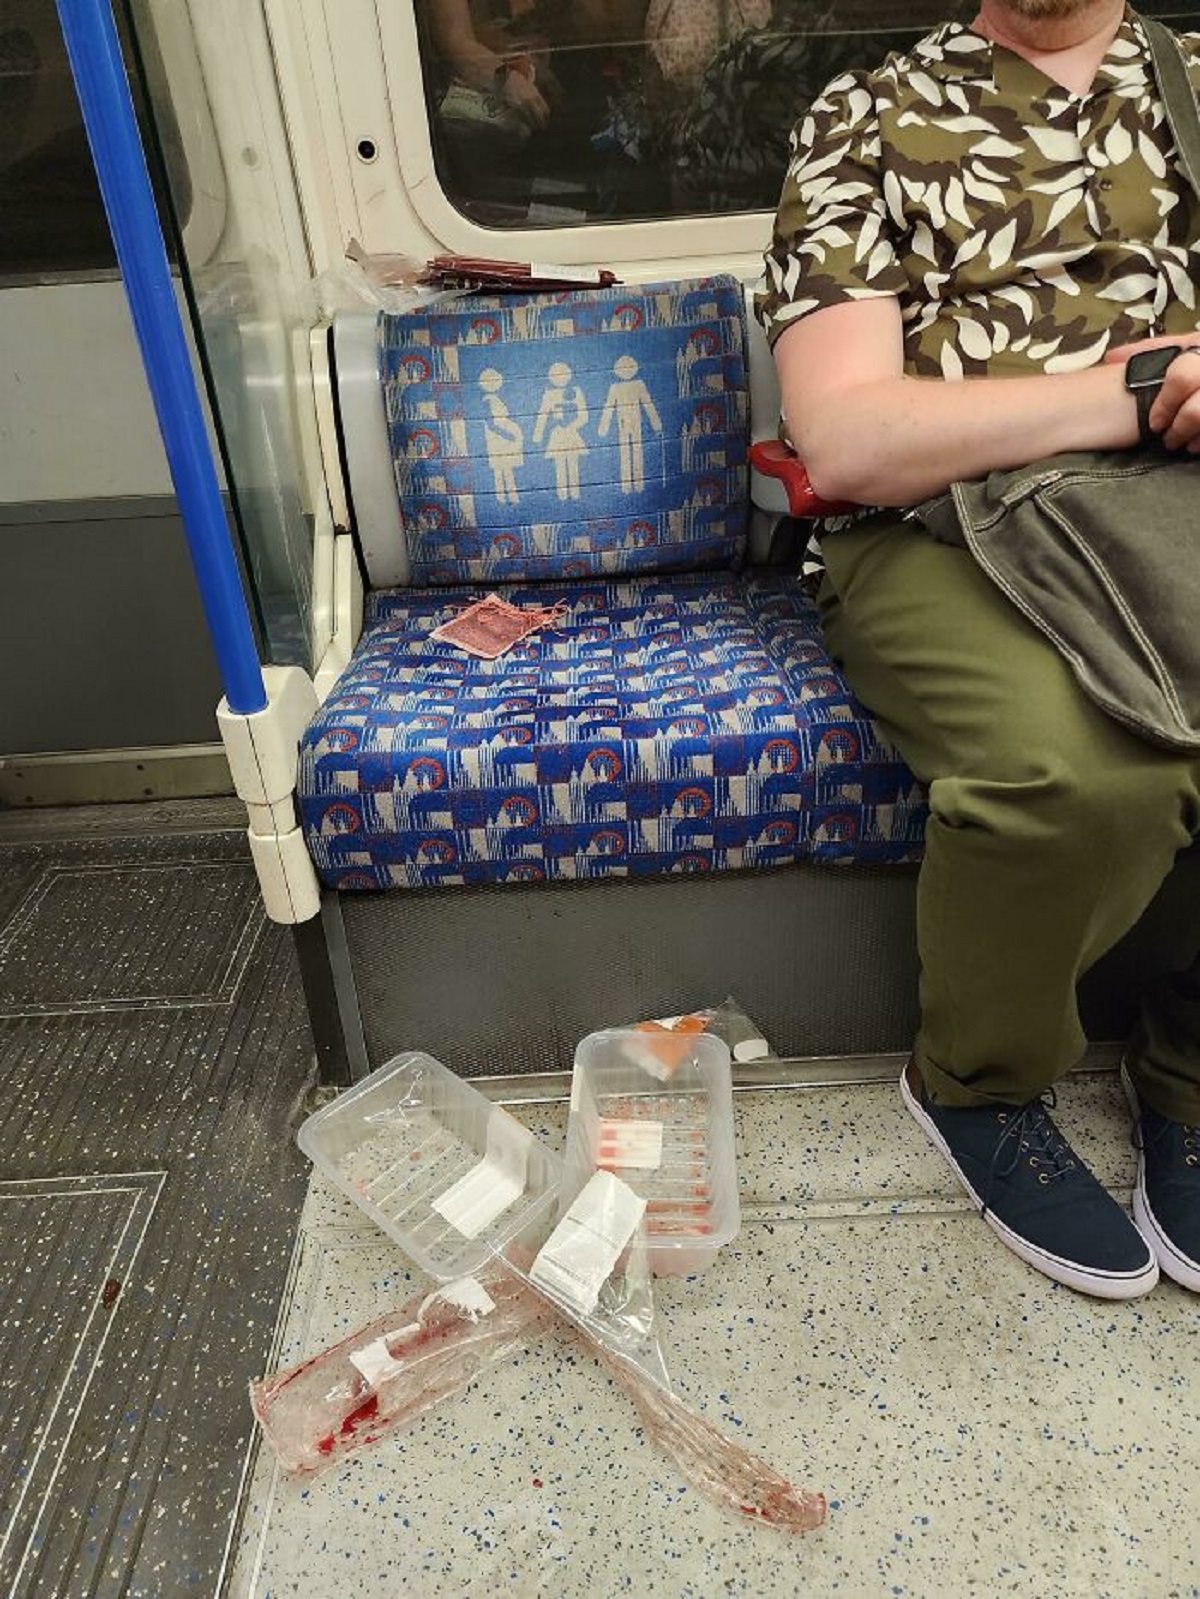 Visiting London And On The Underground We Saw Empty Meat Packages? Are Londoners Just Eating Raw Meat?